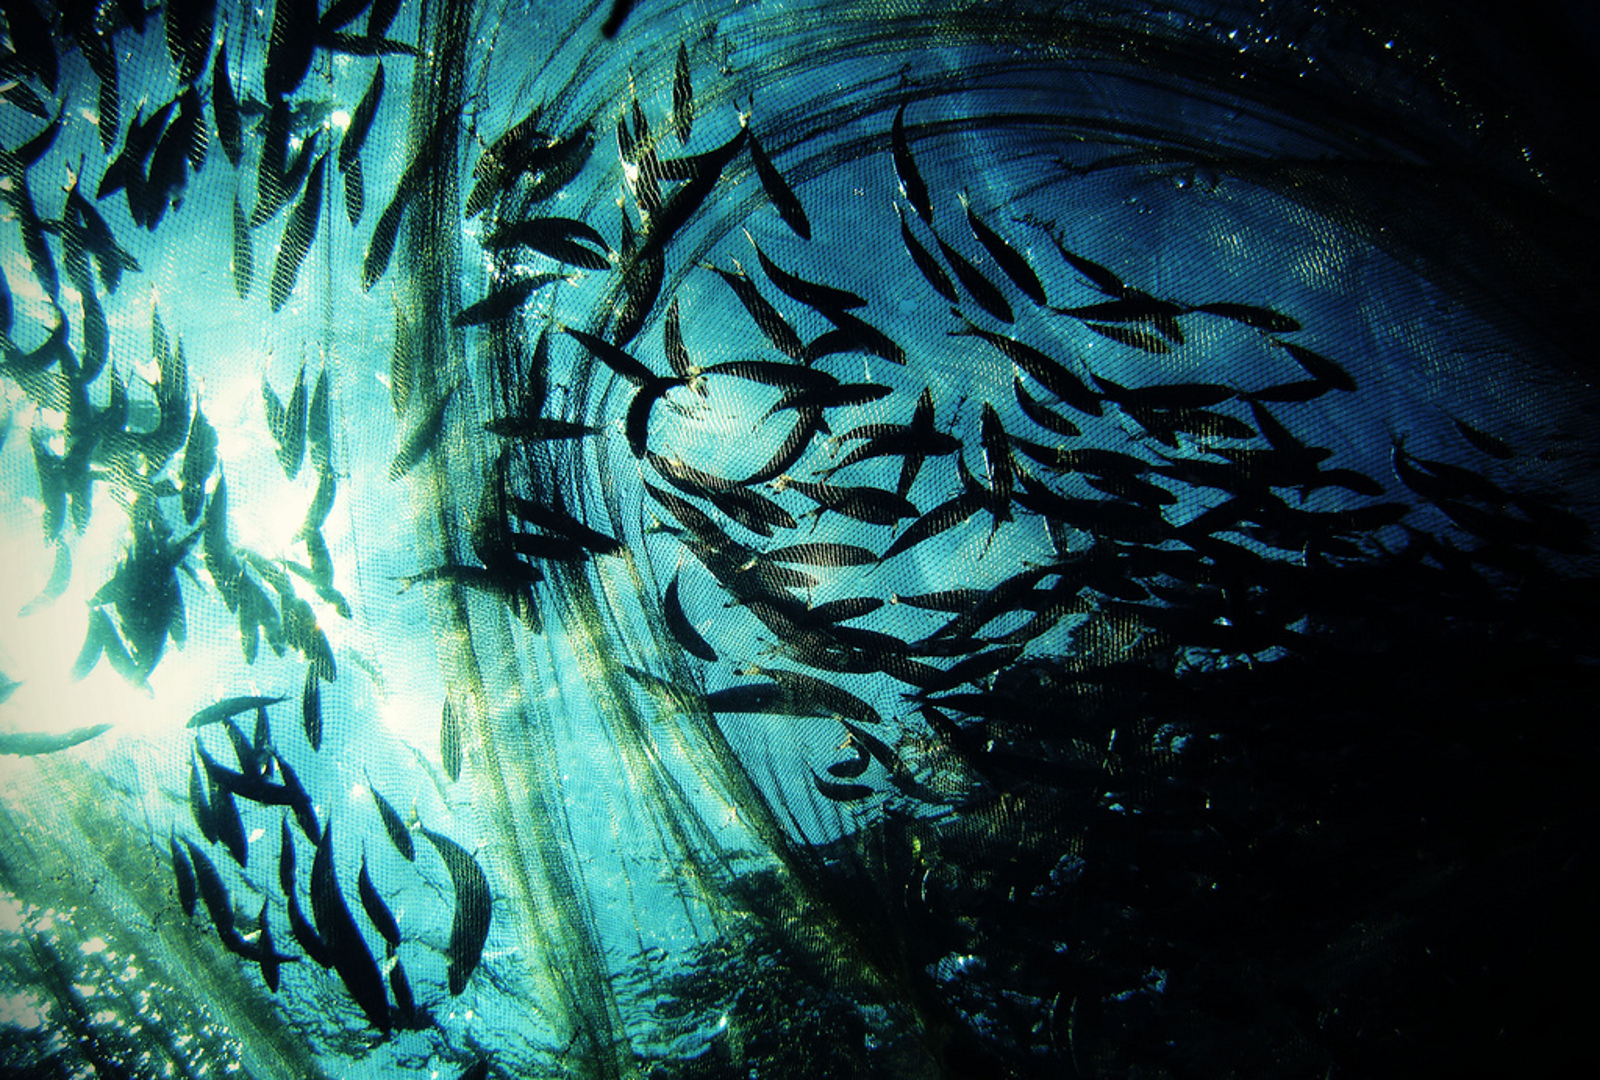 Are There 'Plenty Fish in the Sea'? How Our Appetite for Fish Impacts the Marine Ecosystem